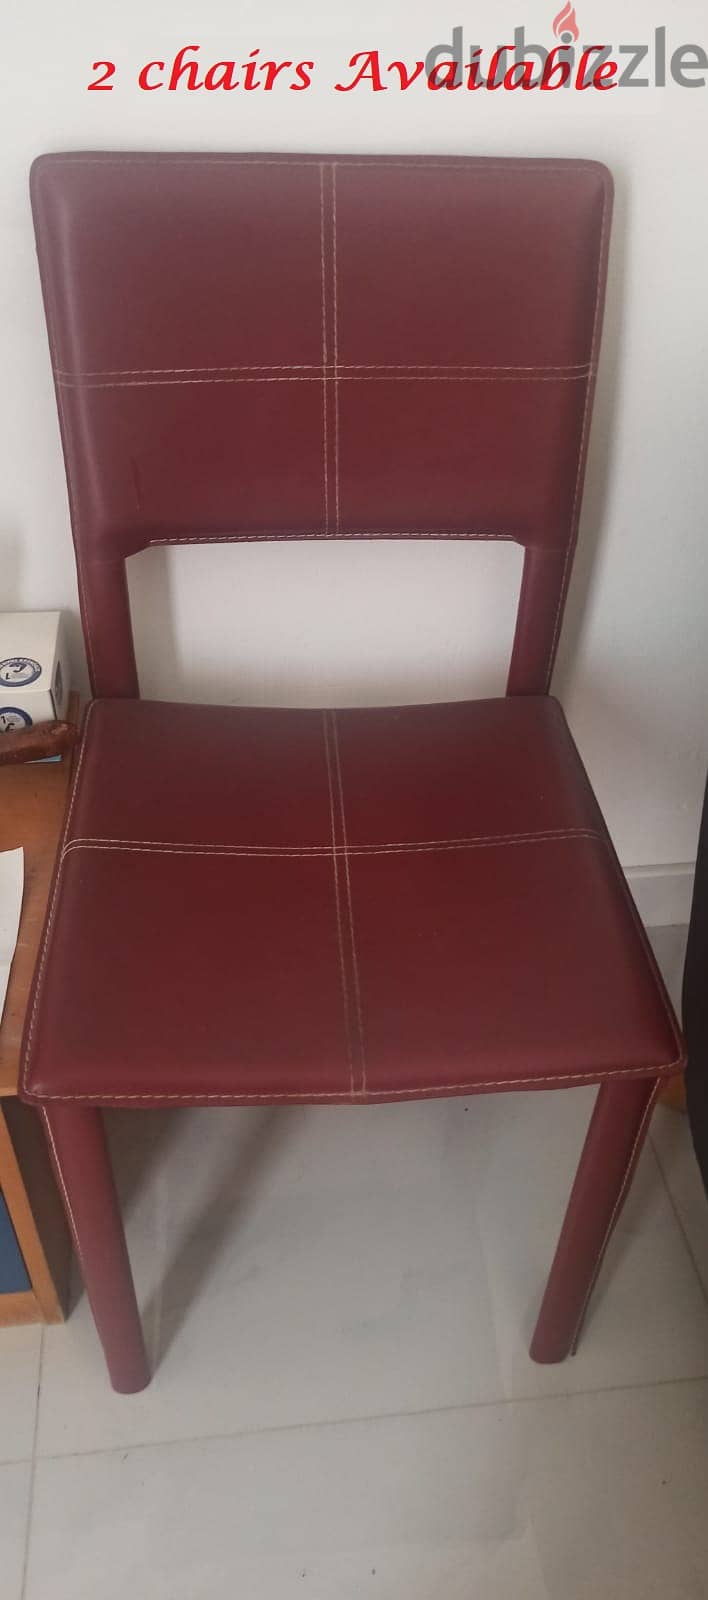 Sale- King Size Mattress, Dressing Table & Chairs in good Condition 6